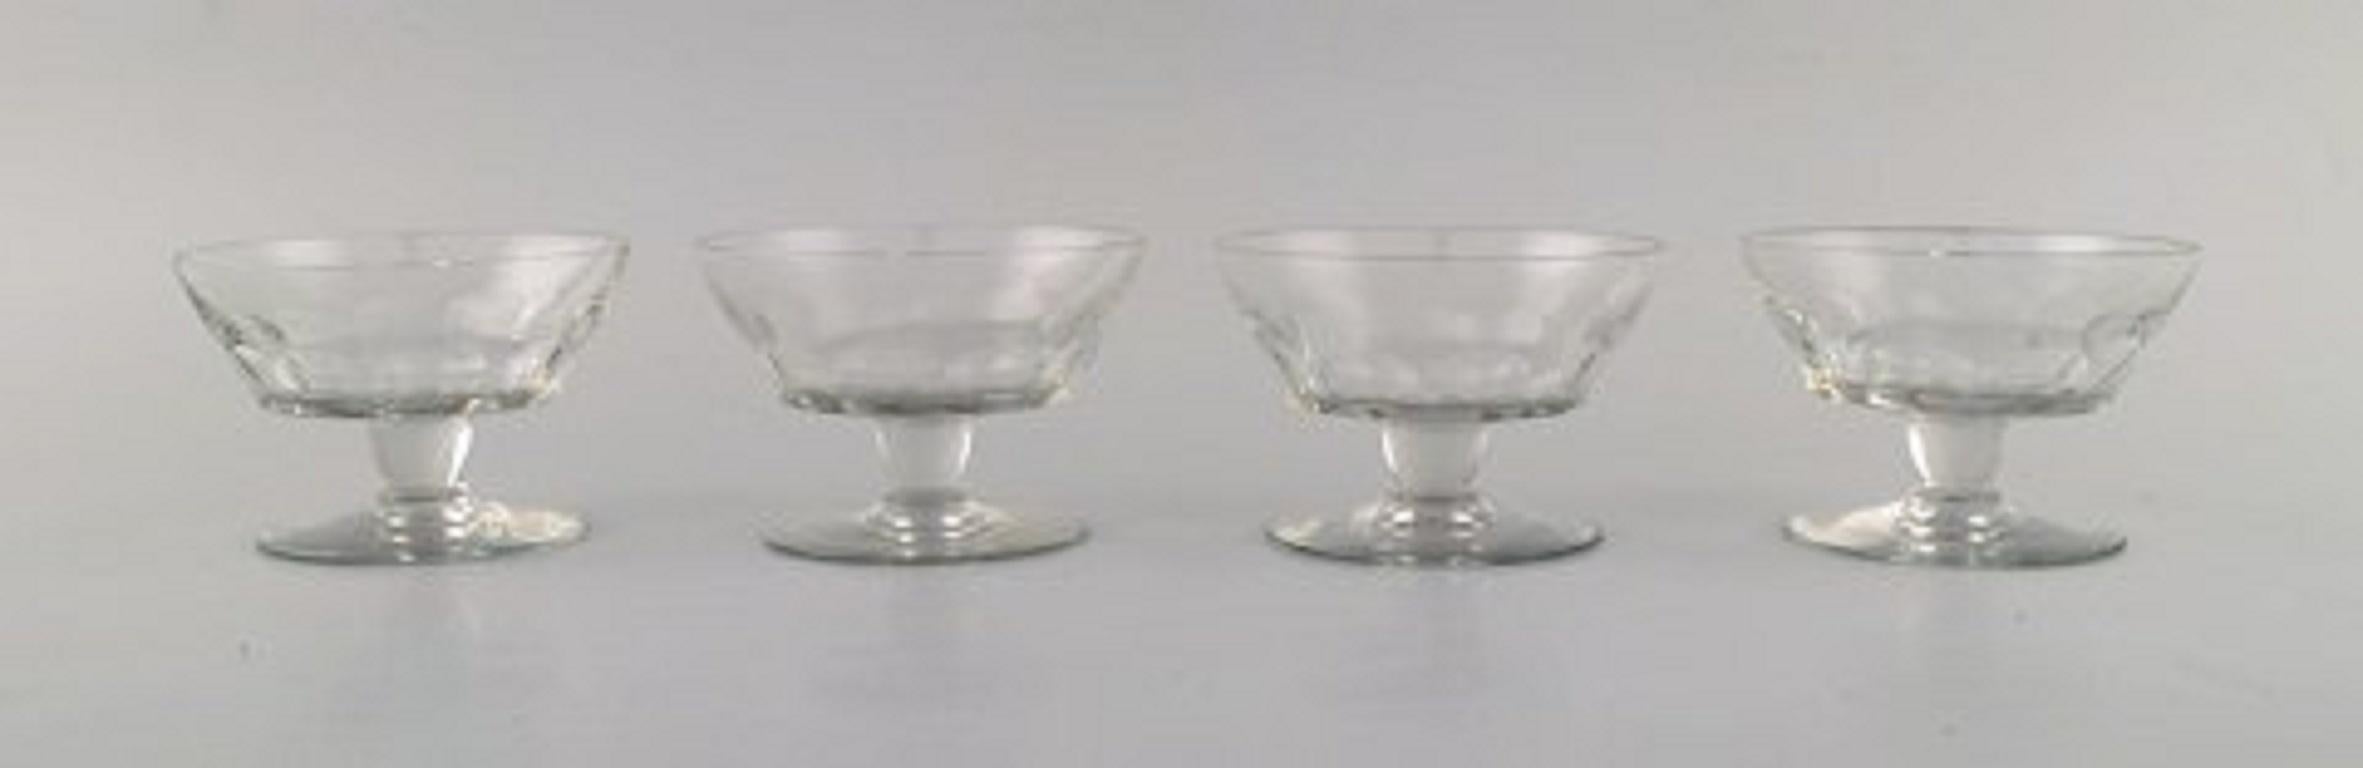 Baccarat, France. Ten facet cut Art Deco glasses. Art glass, 1930s-1940s.
Measures: 9.5 x 6.5 cm.
In very good condition.
Stamped.